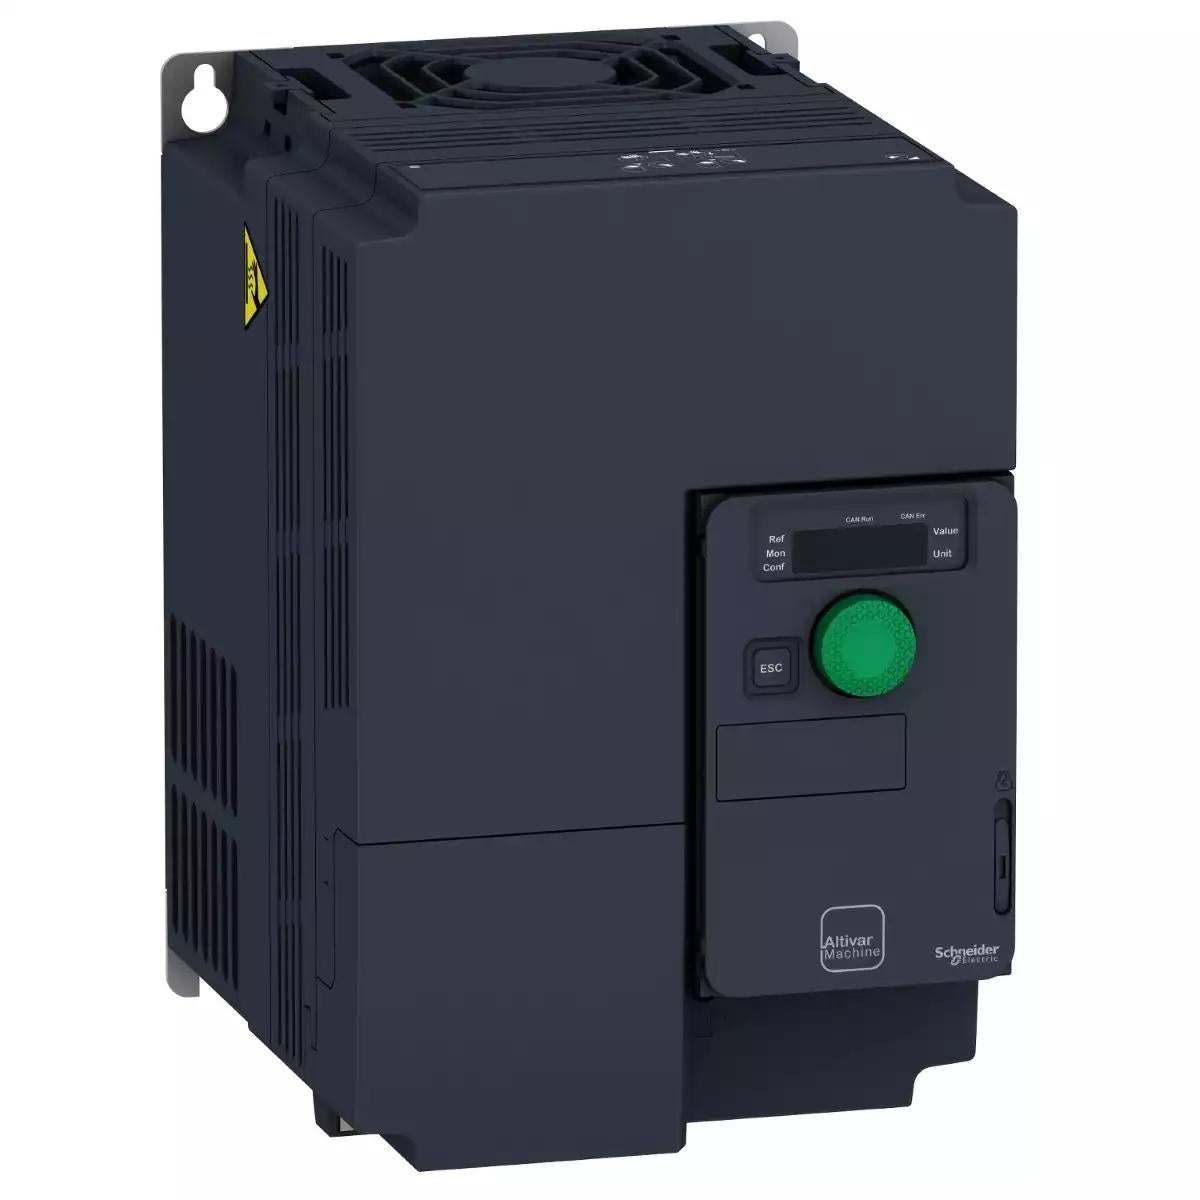 variable speed drive, Altivar Machine ATV320, 5.5kW, 200 to 240V, 3 phases, compact